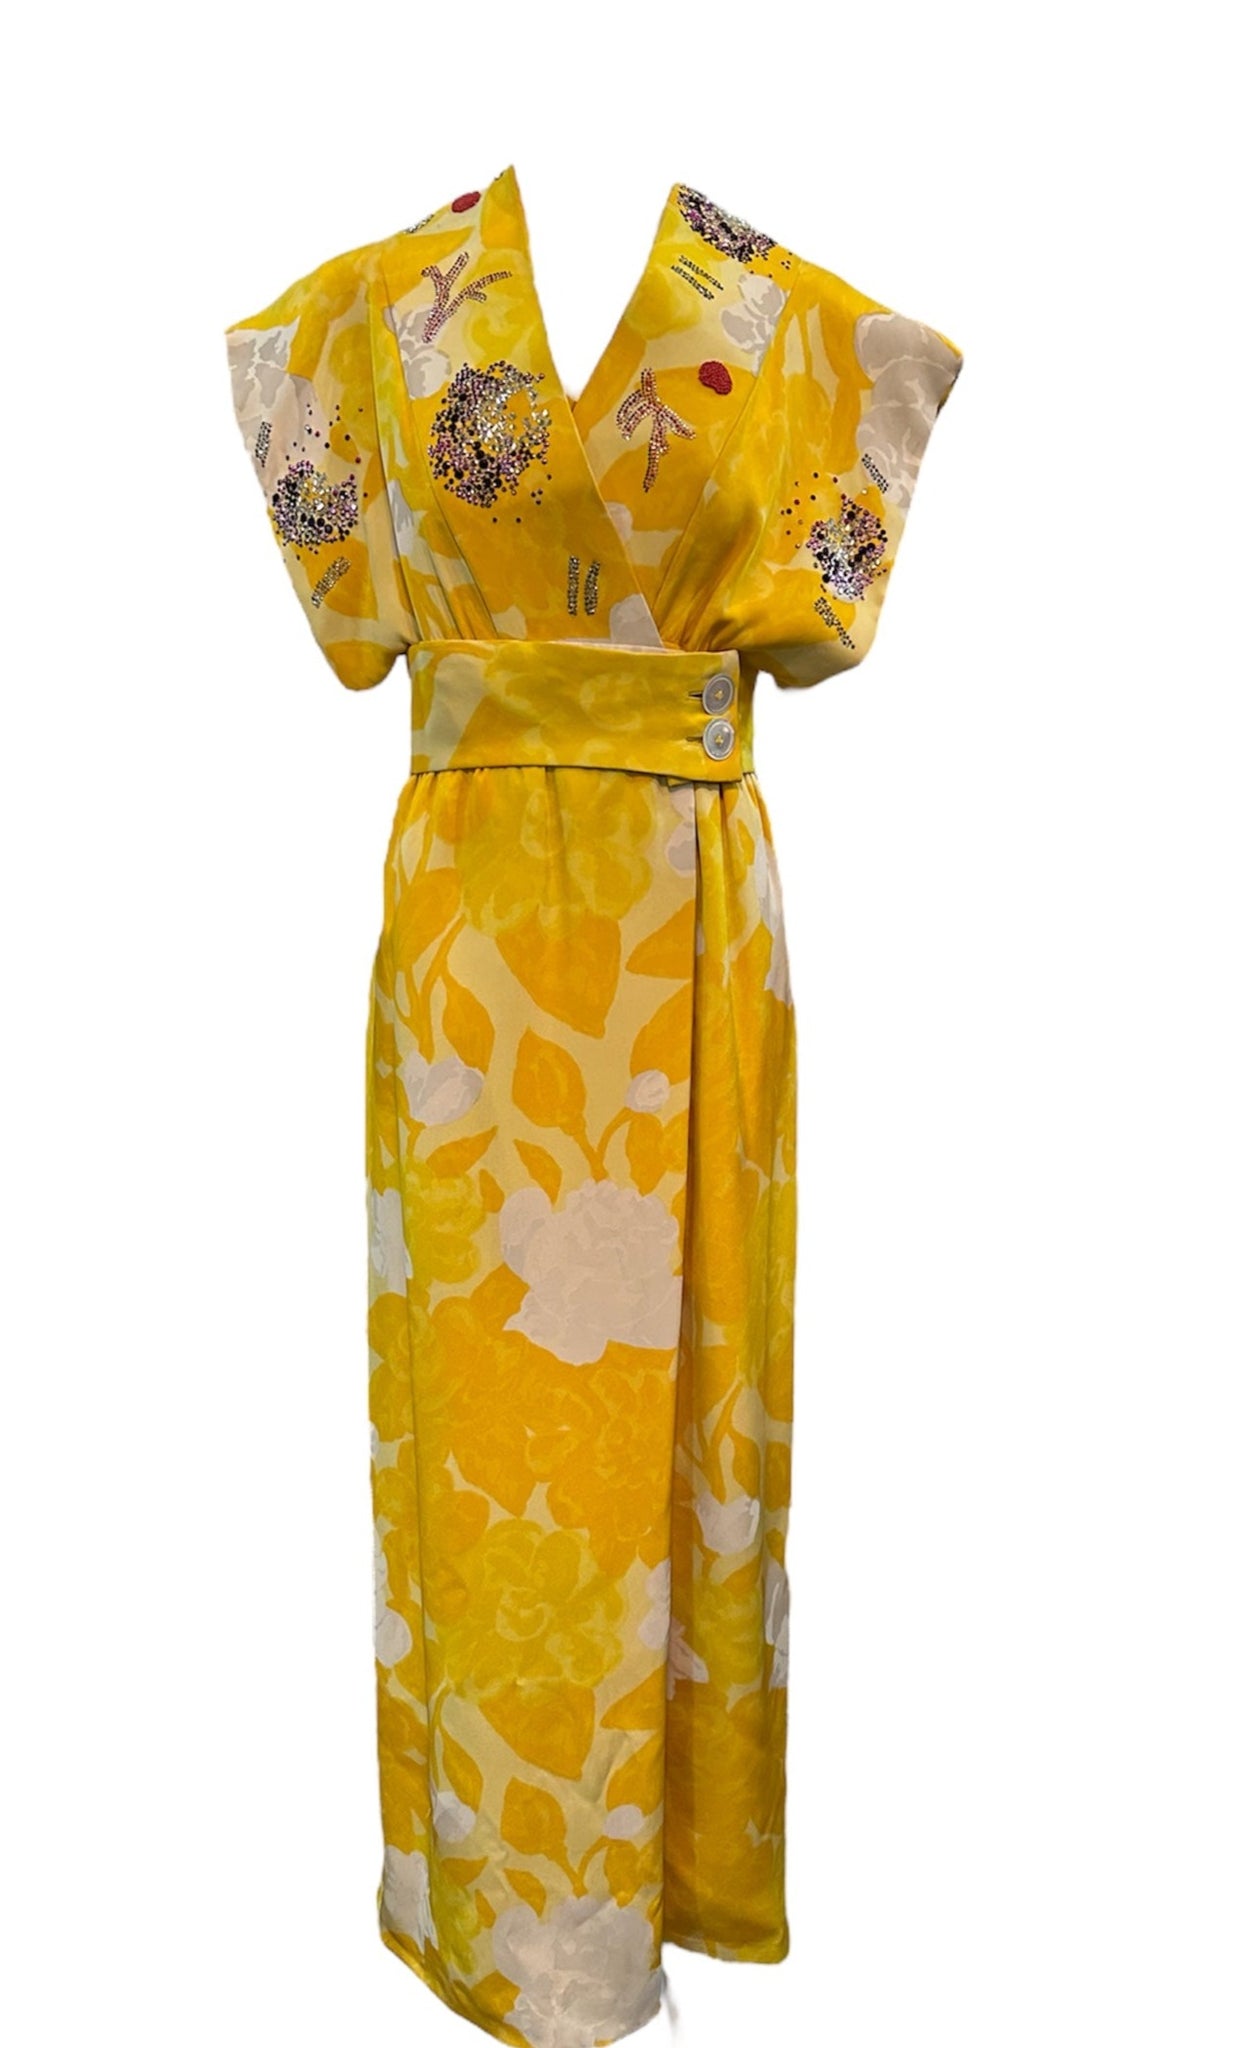 Libertine/Norman Norell Contemporary/1960s Yellow Floral Jacquard Super Embellished Gown WORN BACKWARDS! 10 of 10